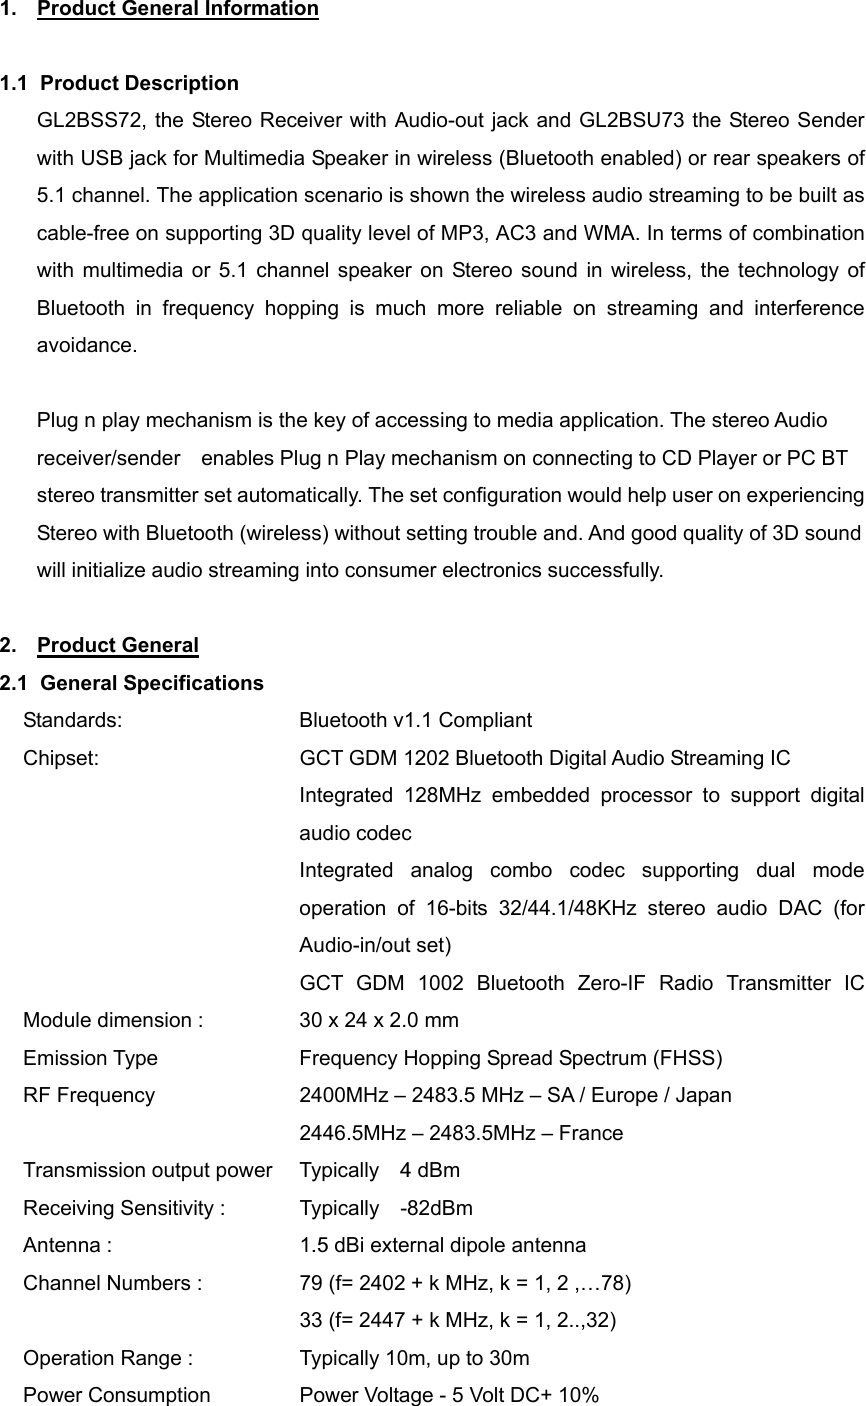 1.  Product General Information  1.1 Product Description GL2BSS72, the Stereo Receiver with Audio-out jack and GL2BSU73 the Stereo Sender with USB jack for Multimedia Speaker in wireless (Bluetooth enabled) or rear speakers of 5.1 channel. The application scenario is shown the wireless audio streaming to be built as cable-free on supporting 3D quality level of MP3, AC3 and WMA. In terms of combination with multimedia or 5.1 channel speaker on Stereo sound in wireless, the technology of Bluetooth in frequency hopping is much more reliable on streaming and interference avoidance.   Plug n play mechanism is the key of accessing to media application. The stereo Audio receiver/sender    enables Plug n Play mechanism on connecting to CD Player or PC BT stereo transmitter set automatically. The set configuration would help user on experiencing Stereo with Bluetooth (wireless) without setting trouble and. And good quality of 3D sound will initialize audio streaming into consumer electronics successfully.  2. Product General 2.1 General Specifications Standards:    Bluetooth v1.1 Compliant Chipset:                GCT GDM 1202 Bluetooth Digital Audio Streaming IC Integrated 128MHz embedded processor to support digital audio codec Integrated analog combo codec supporting dual mode operation of 16-bits 32/44.1/48KHz stereo audio DAC (for Audio-in/out set)                          GCT GDM 1002  Bluetooth Zero-IF  Radio  Transmitter  IC            Module dimension :            30 x 24 x 2.0 mm   Emission Type      Frequency Hopping Spread Spectrum (FHSS) RF Frequency      2400MHz – 2483.5 MHz – SA / Europe / Japan                            2446.5MHz – 2483.5MHz – France Transmission output power   Typically  4 dBm Receiving Sensitivity :        Typically  -82dBm Antenna :                 1.5 dBi external dipole antenna Channel Numbers :                79 (f= 2402 + k MHz, k = 1, 2 ,…78)               33 (f= 2447 + k MHz, k = 1, 2..,32) Operation Range :                Typically 10m, up to 30m Power Consumption                Power Voltage - 5 Volt DC+ 10% 